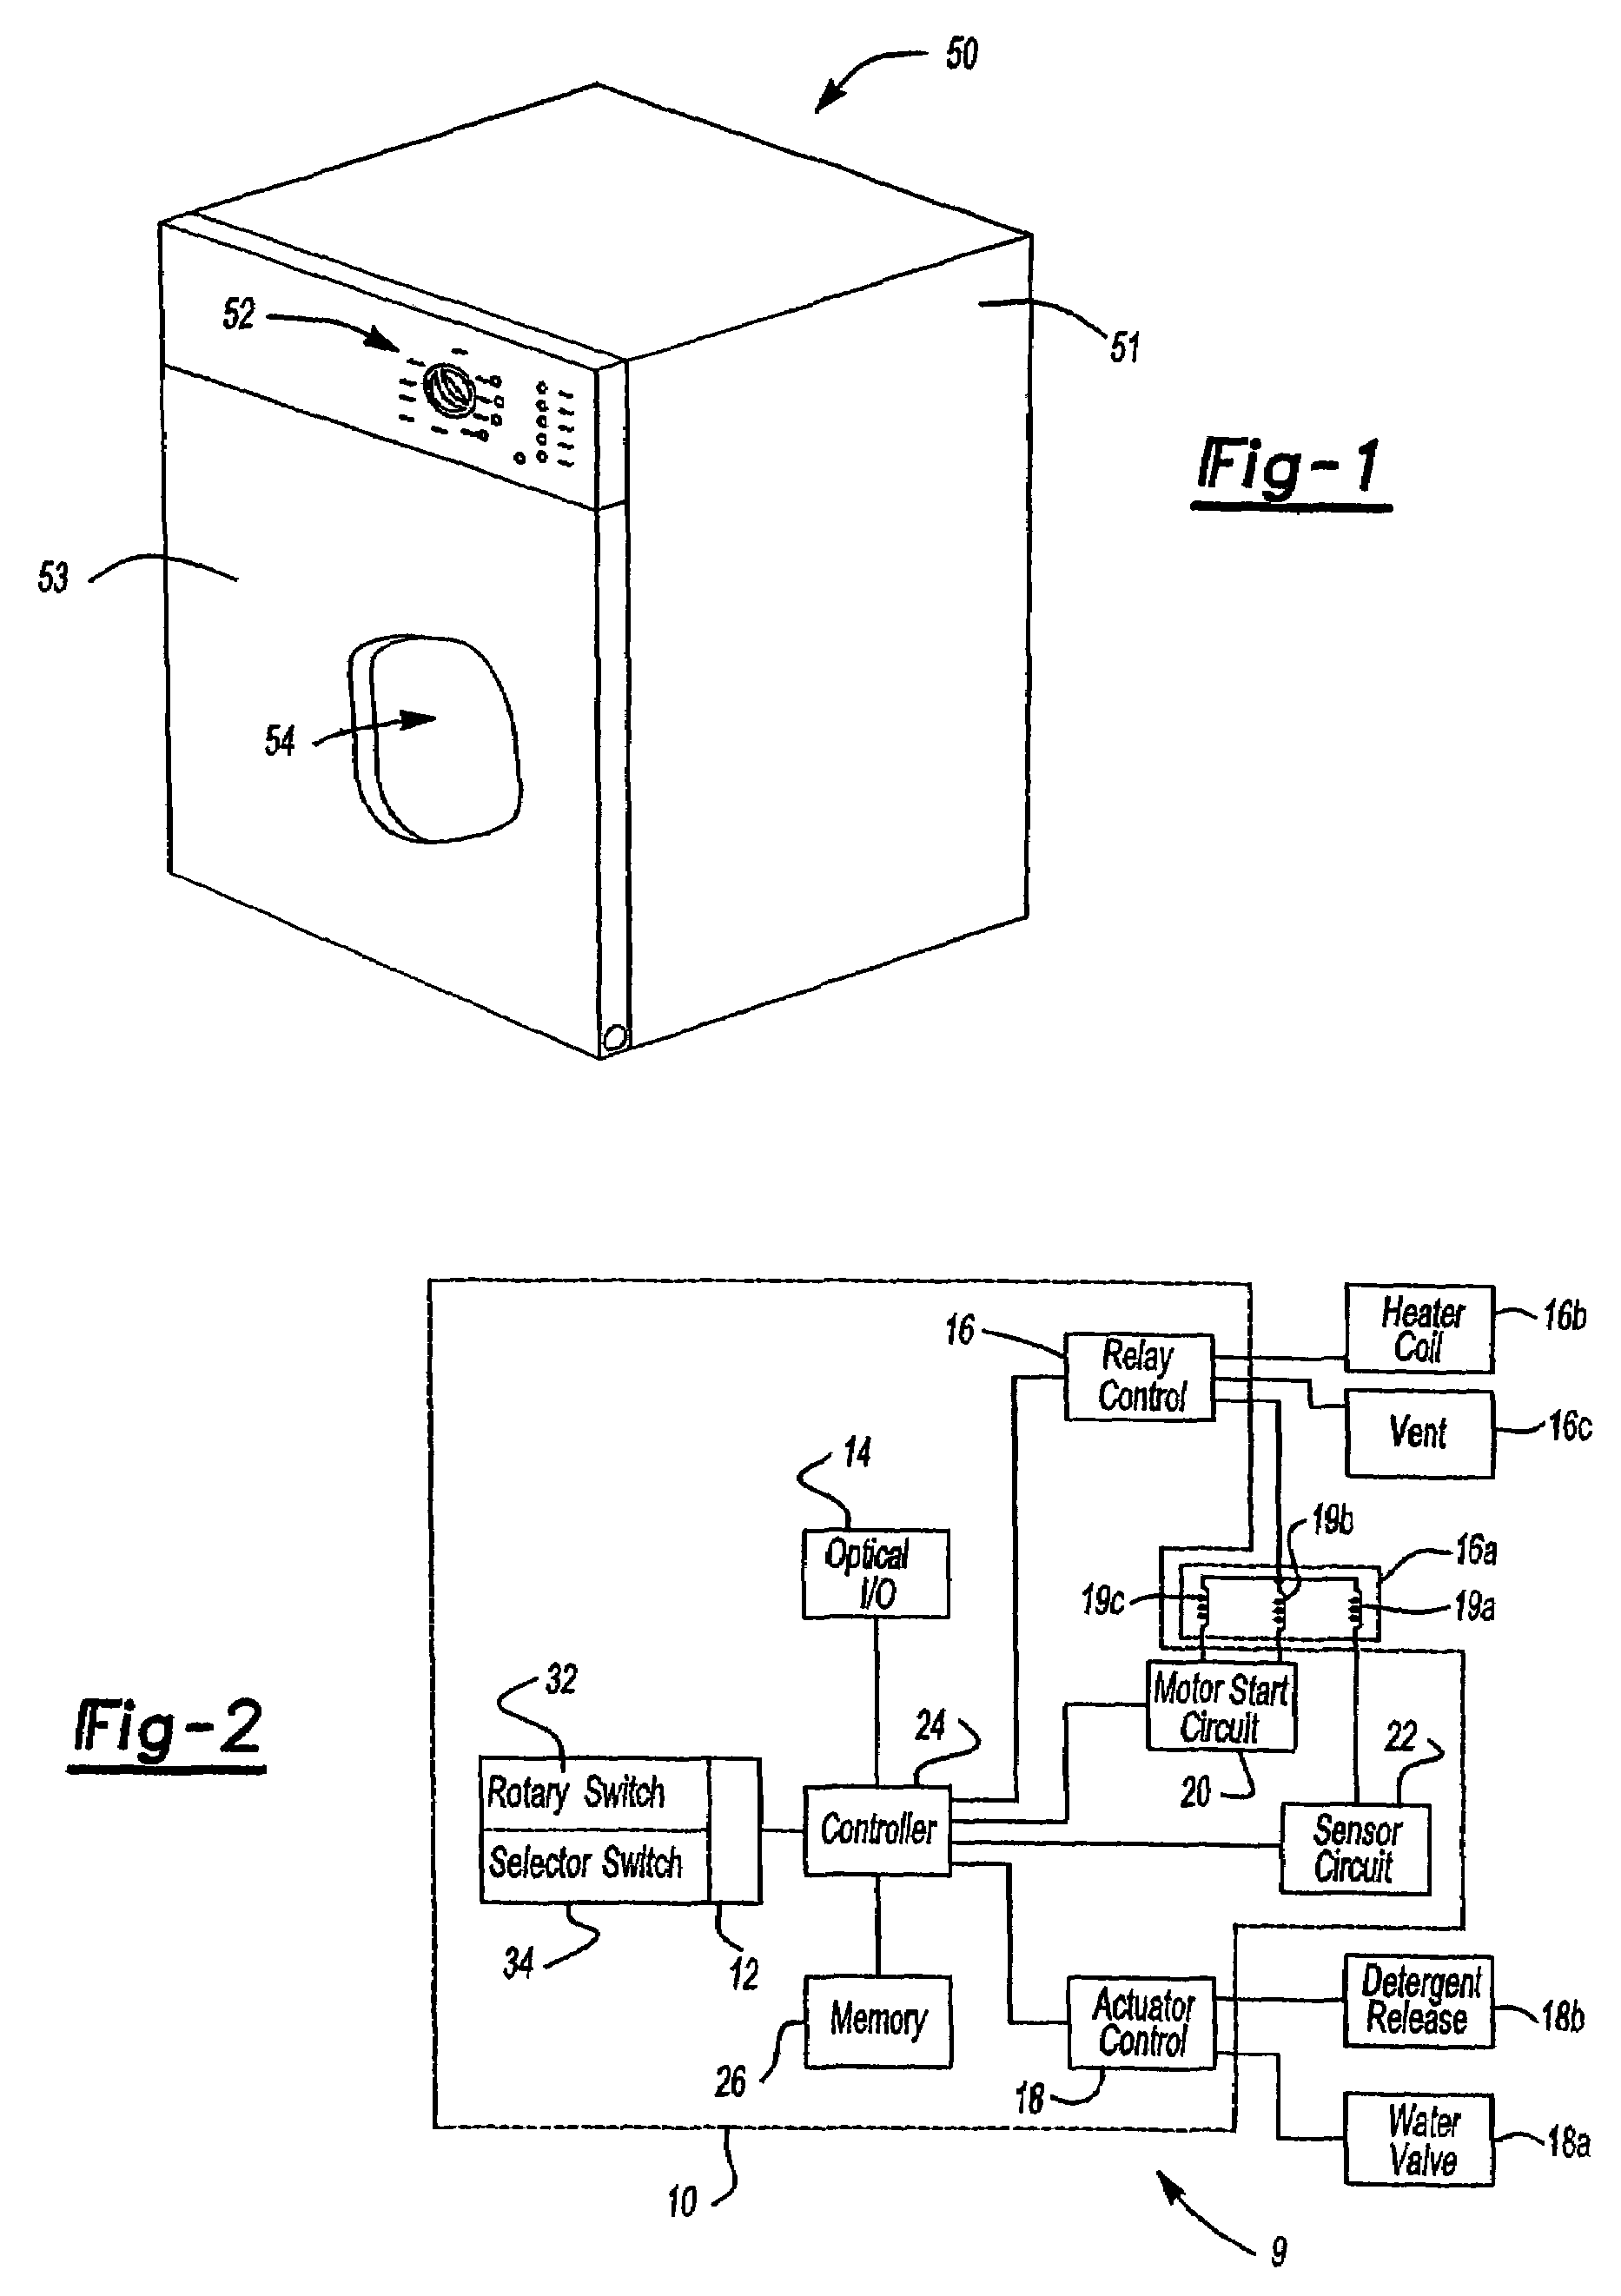 Method and apparatus for operating an optical receiver for low intensity optical communication in a high speed mode